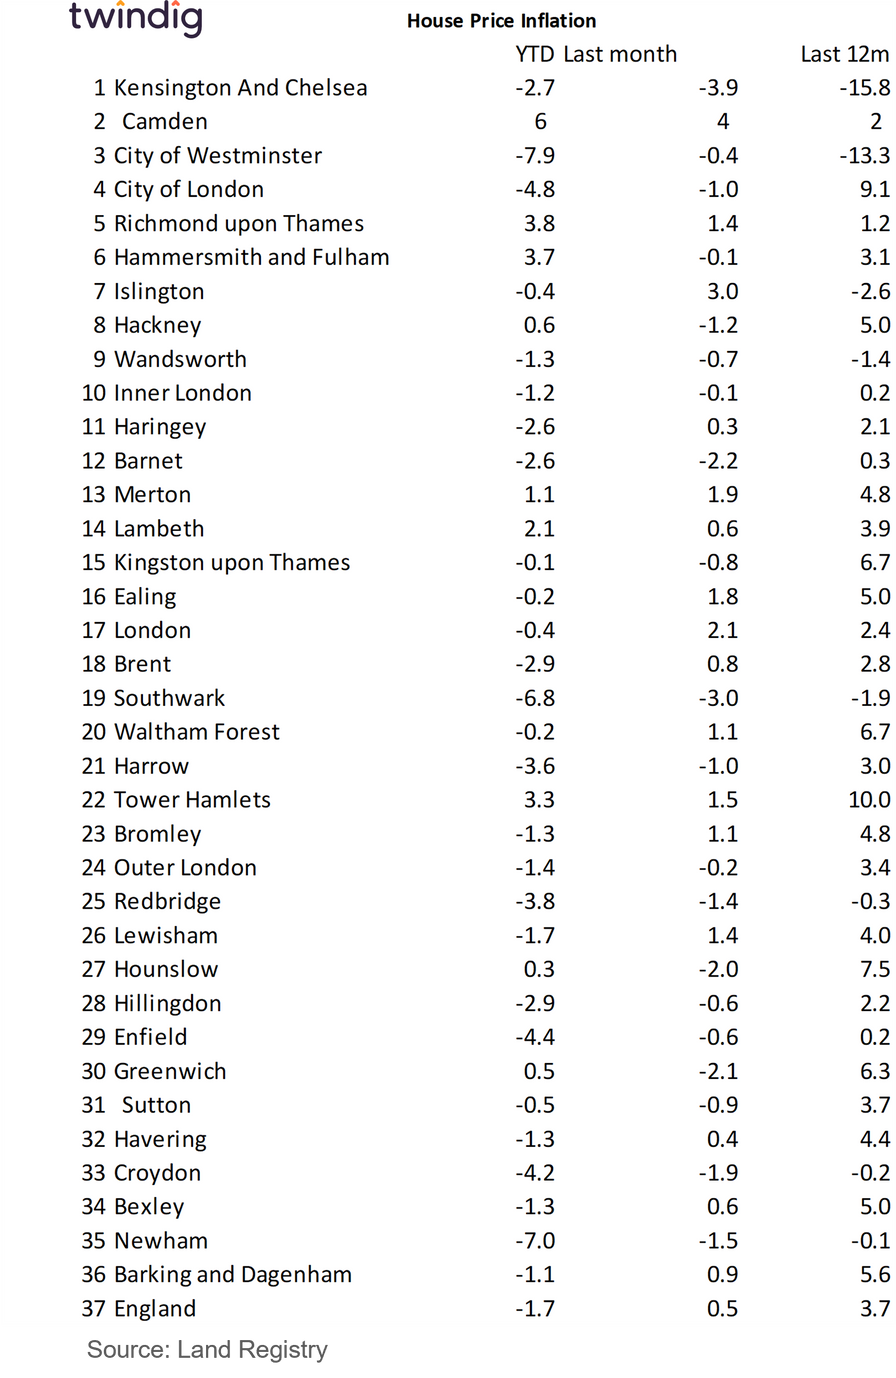 Table showing london house price changes in London last month and last year by london borough twindig Housing Hailey